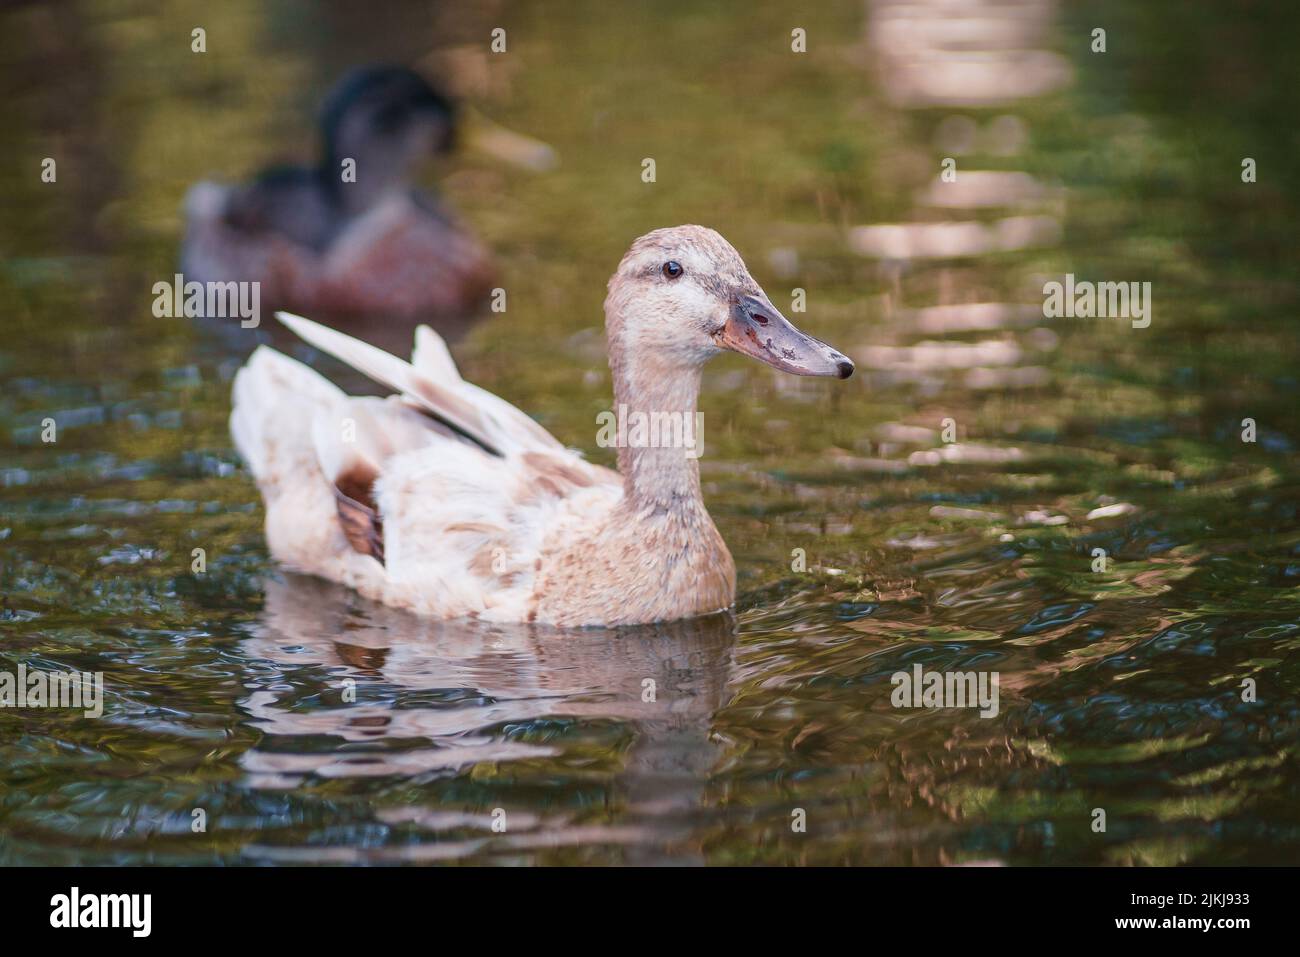 A shallow focus shot of an Indian Runner duck swimming in calm water during daytime with blurred background Stock Photo